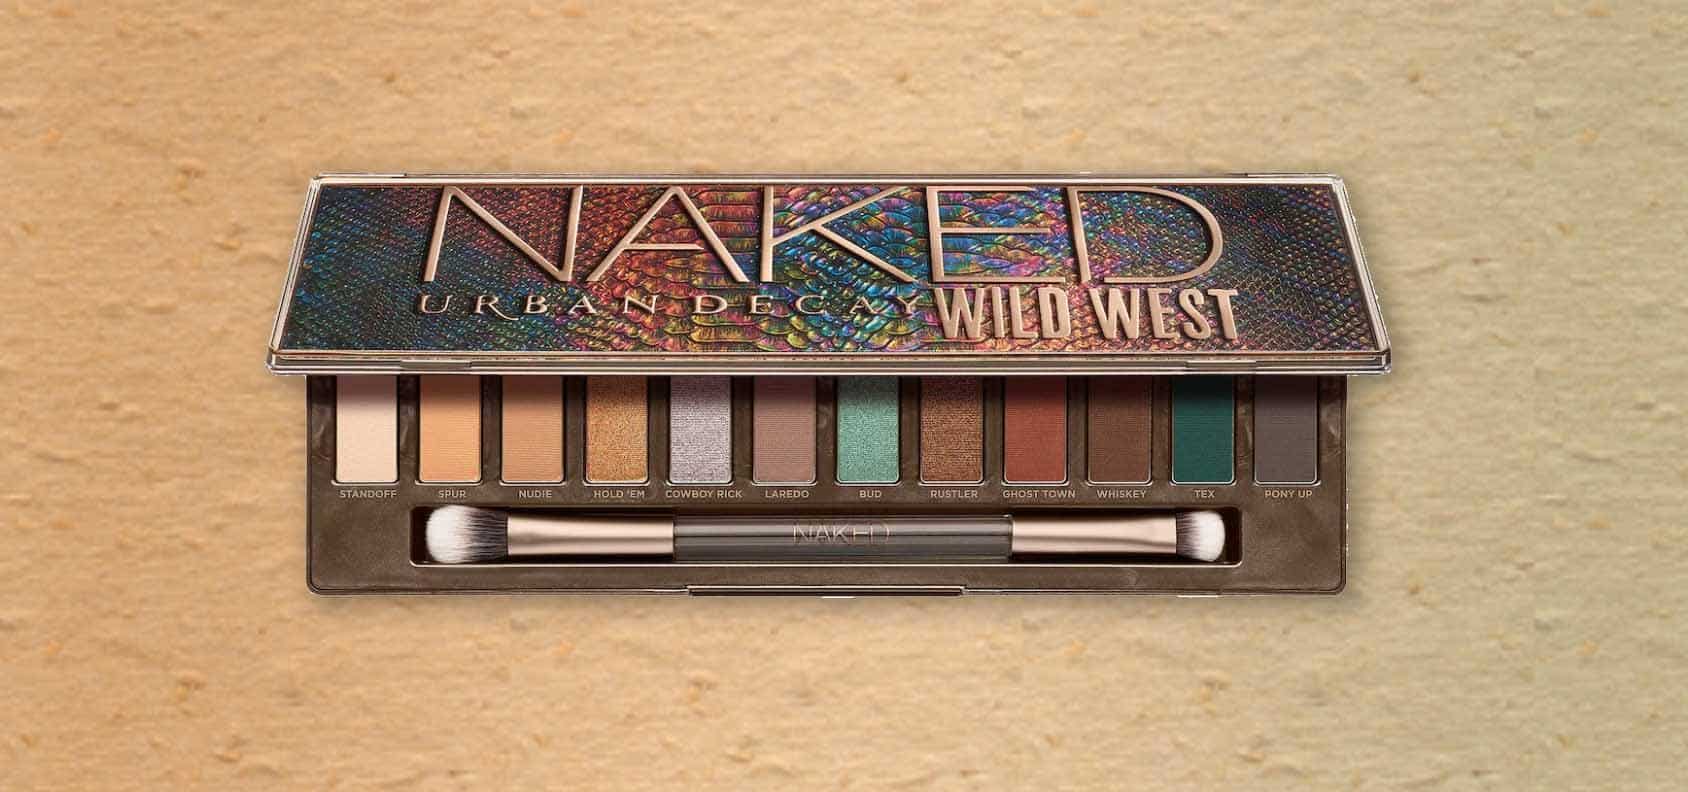 Urban Decay Naked Wild West Eyeshadow Palette review